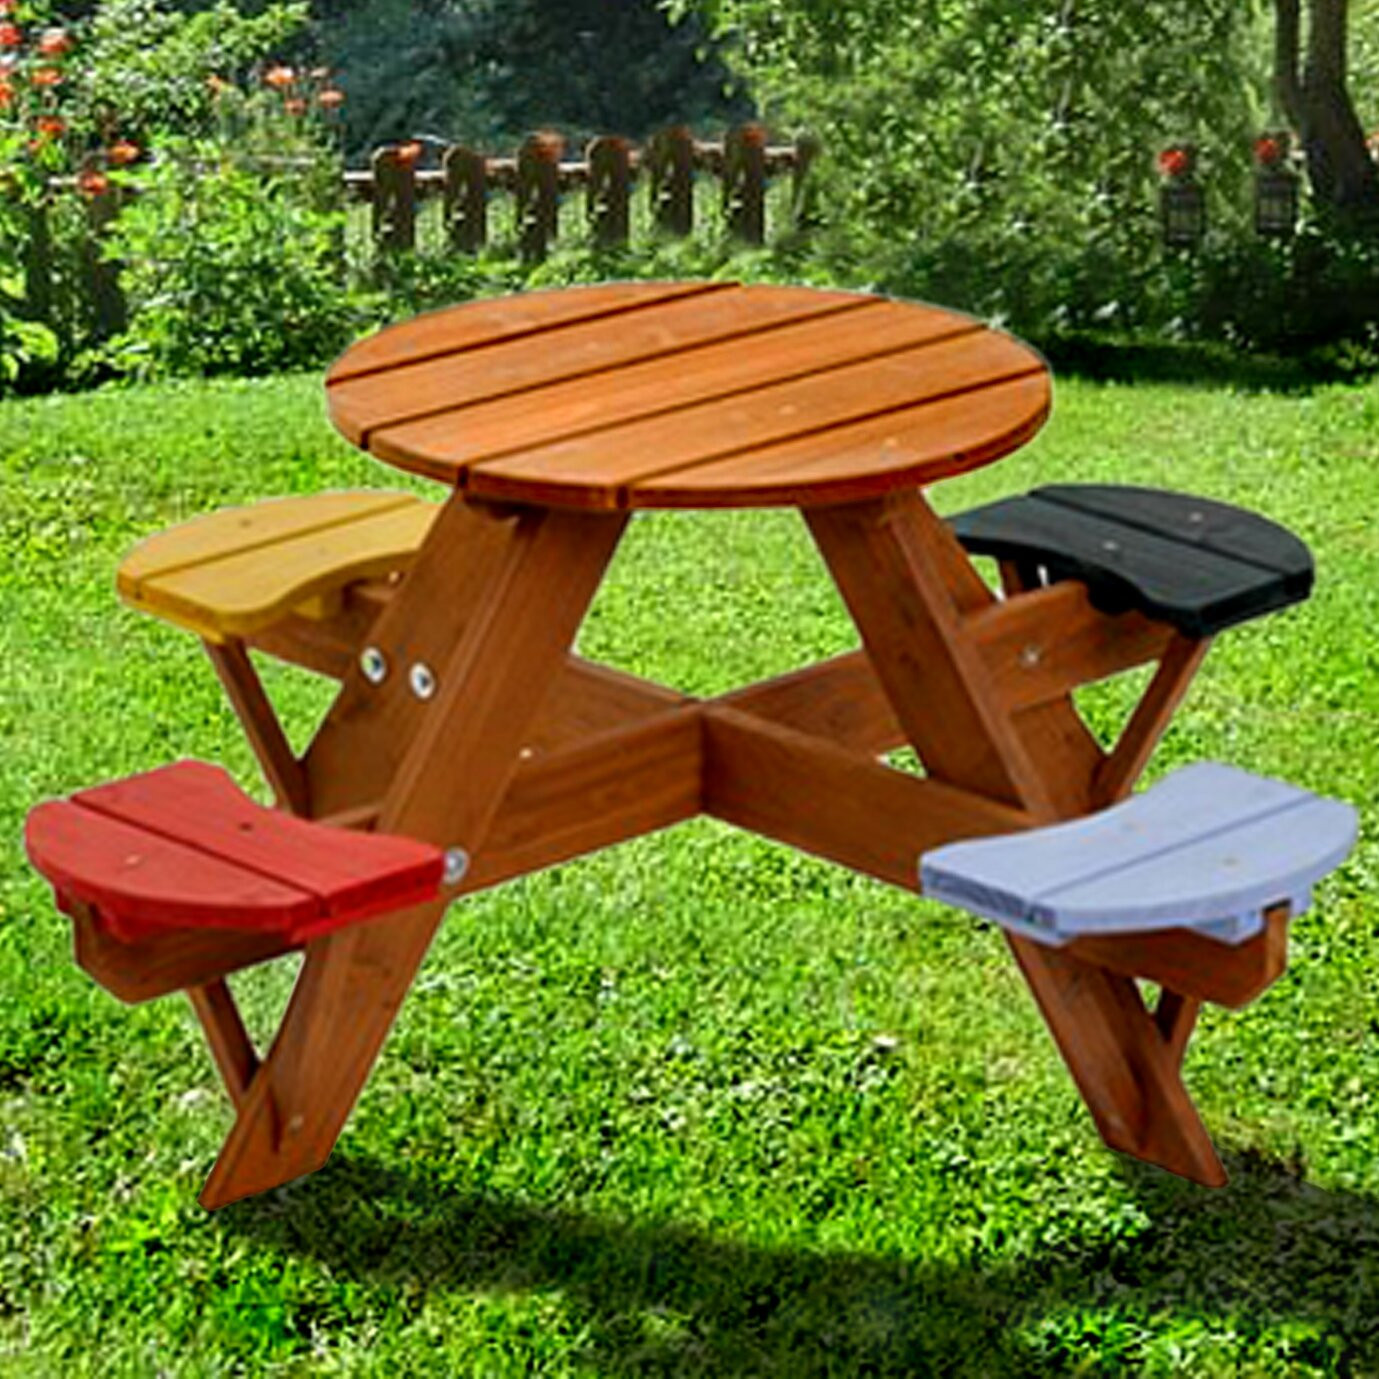 Picnic Table For Kids
 Swing Town Kids Picnic Table & Reviews